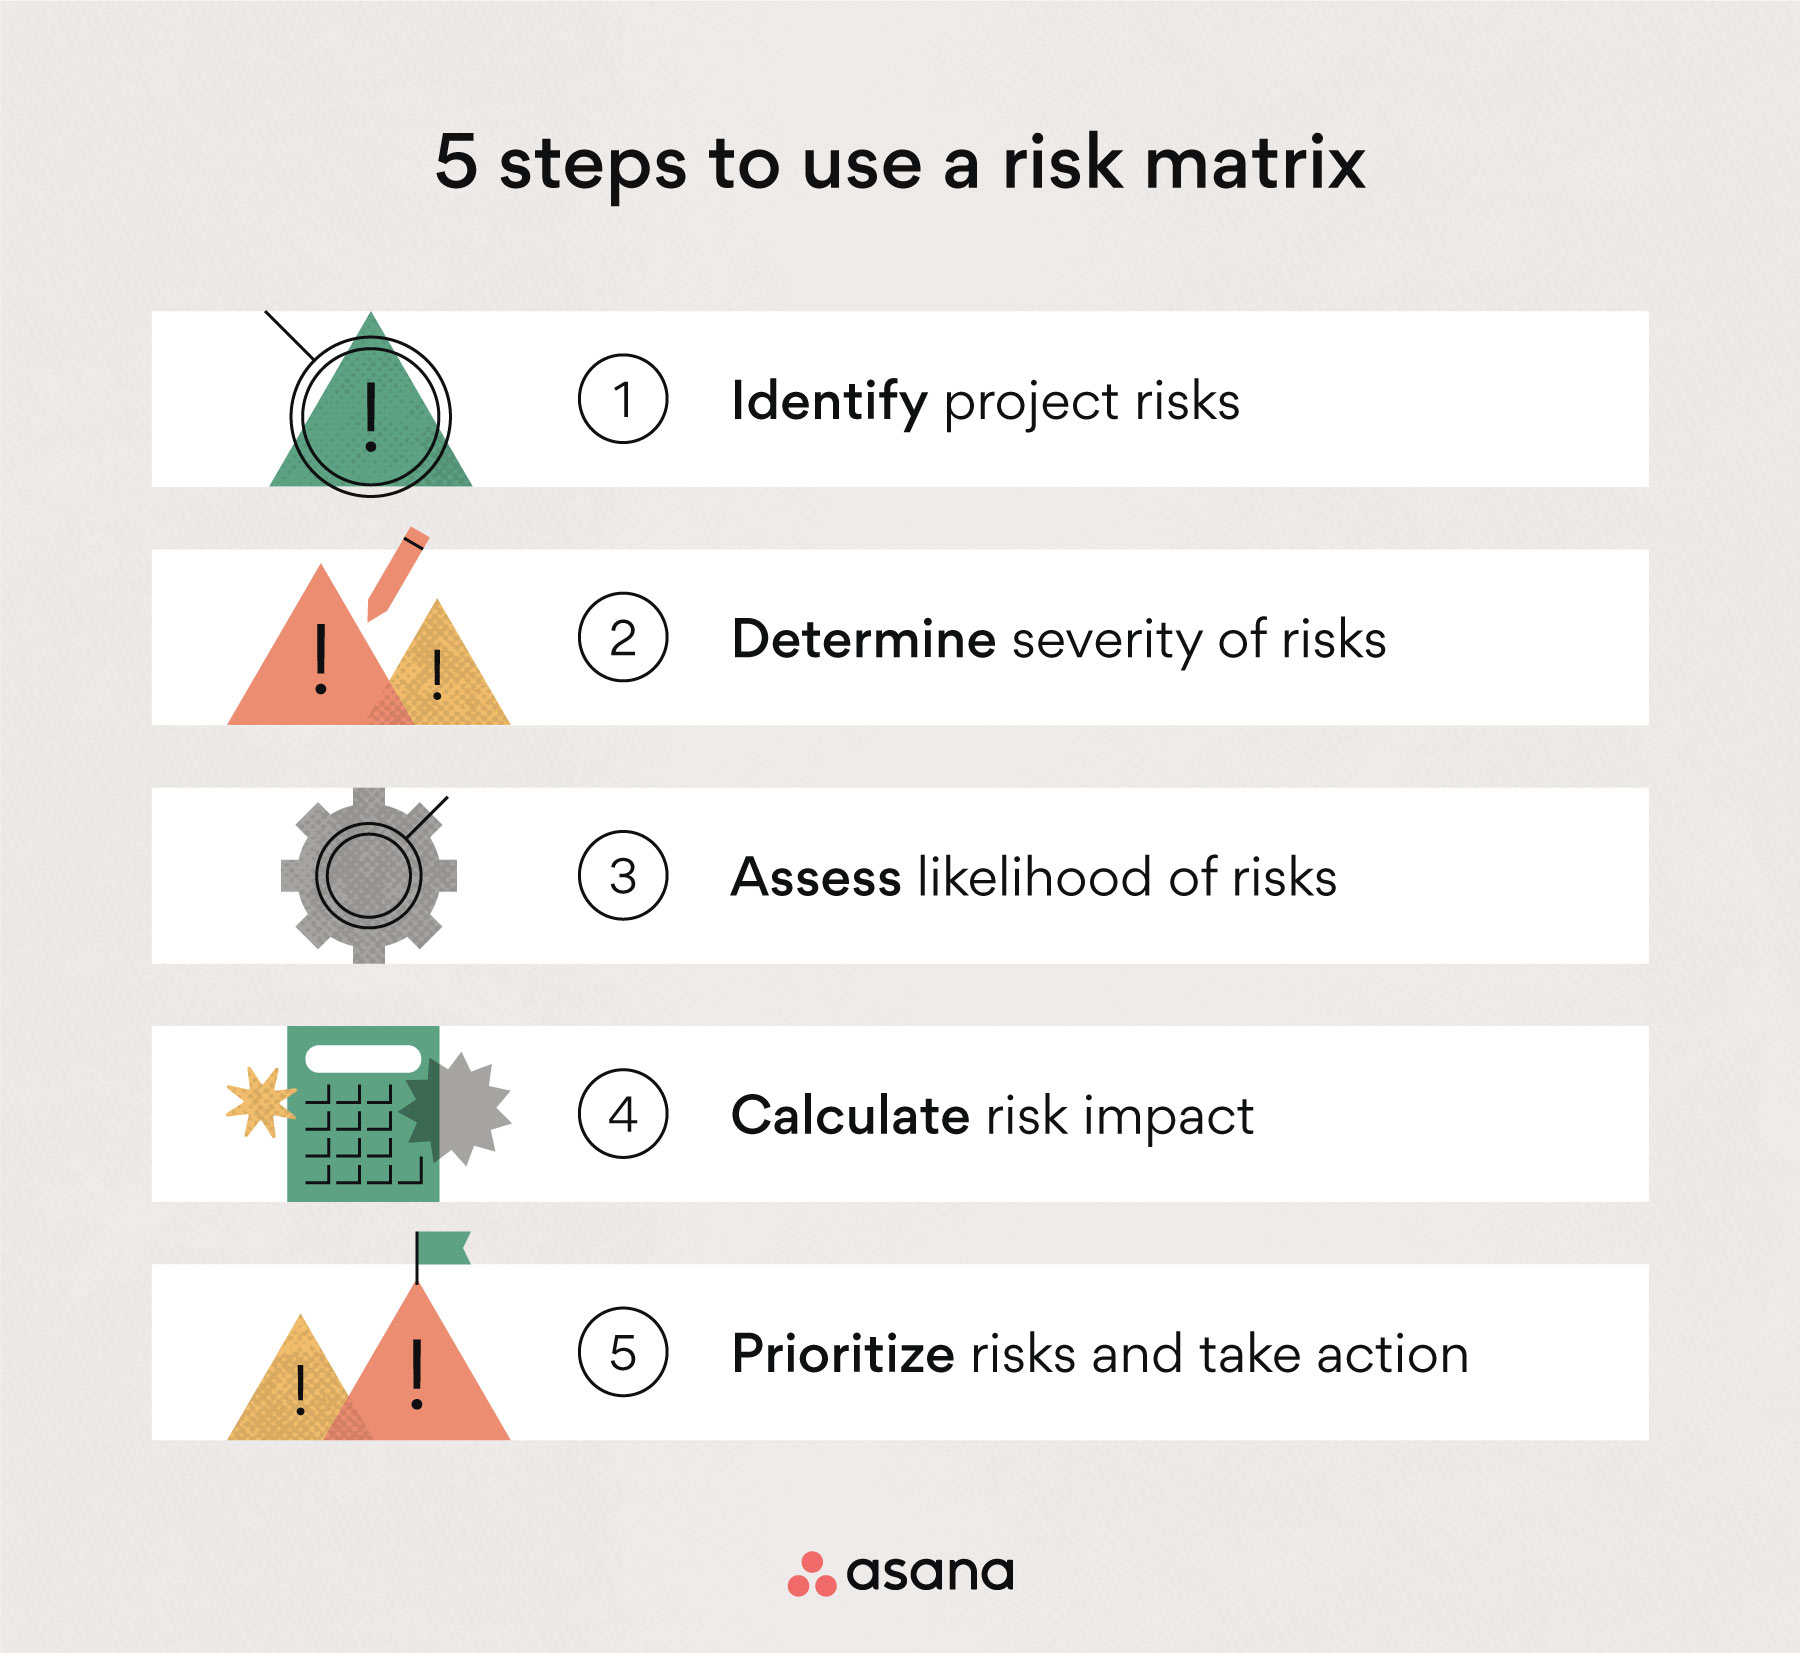 [inline illustration] 5 steps to use a risk matrix (infographic)